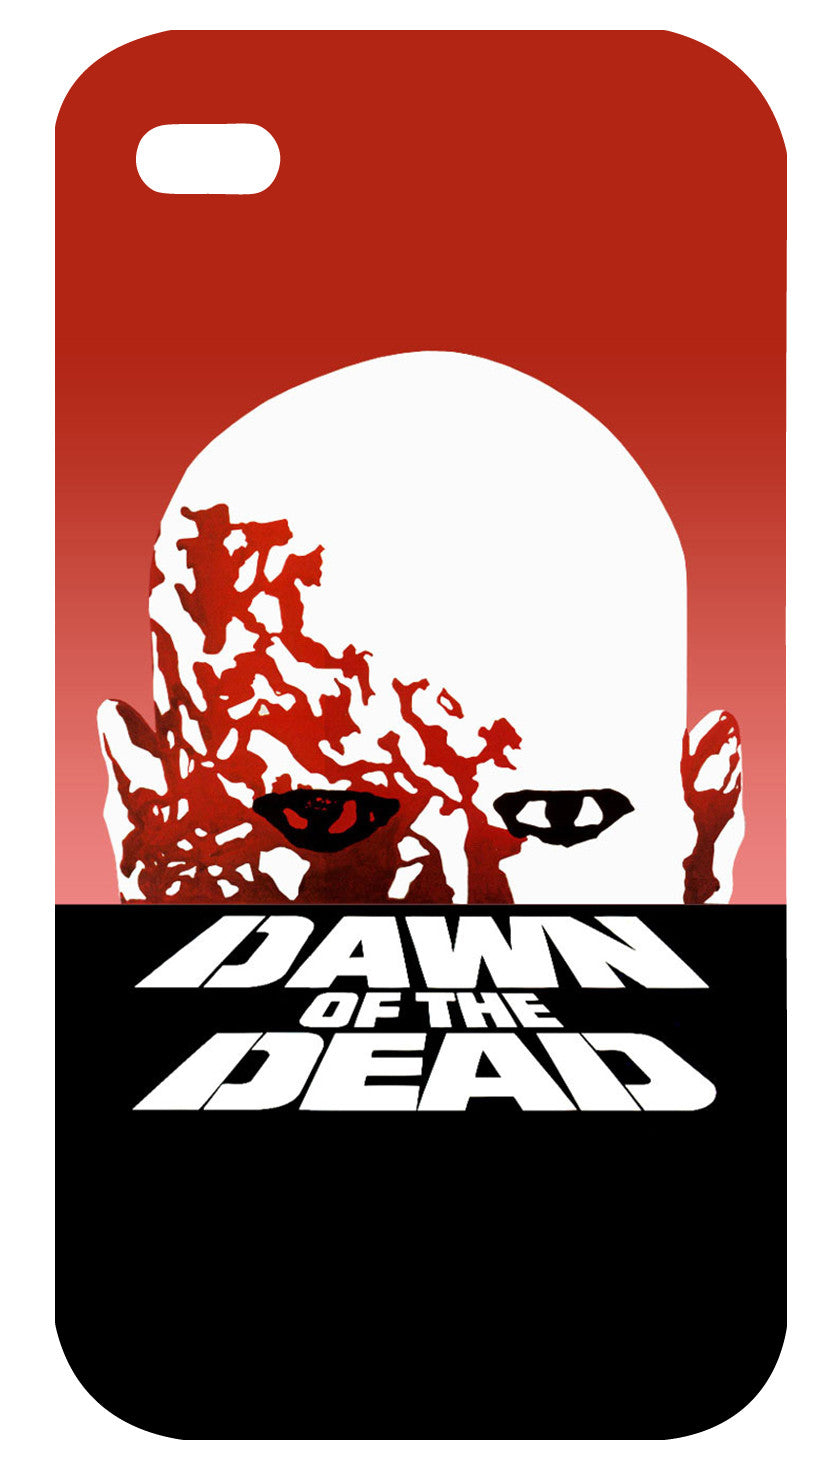 Dawn of the Dead Style A iPhone 4/4S Case